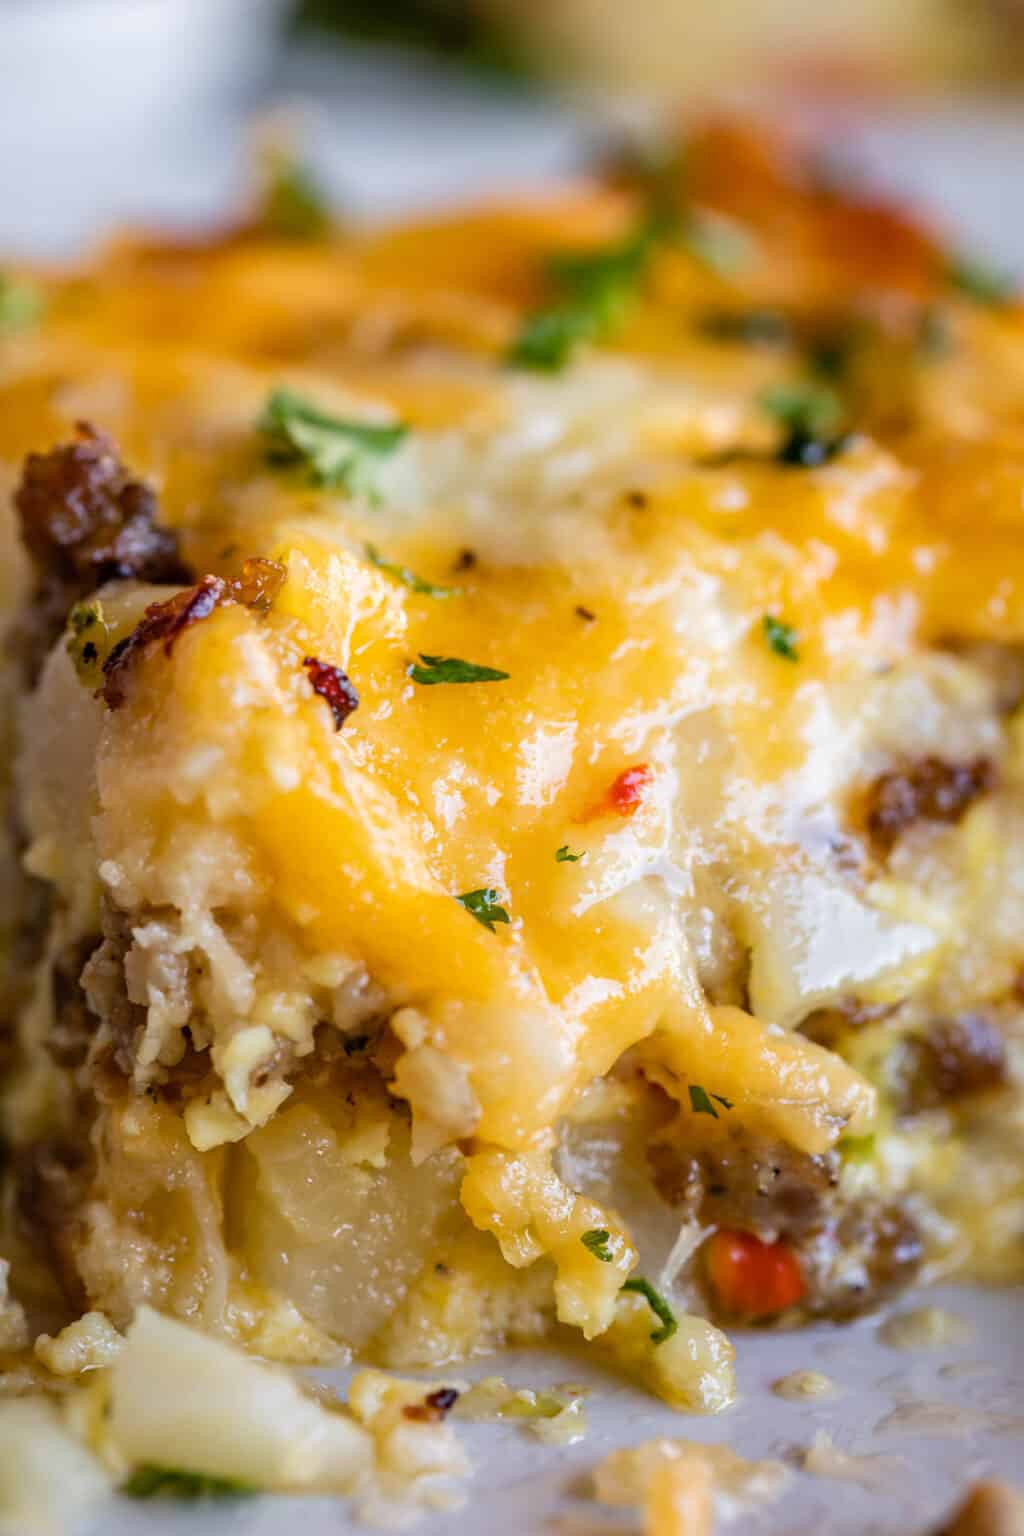 Easy Overnight Breakfast Casserole with Sausage - The Food Charlatan